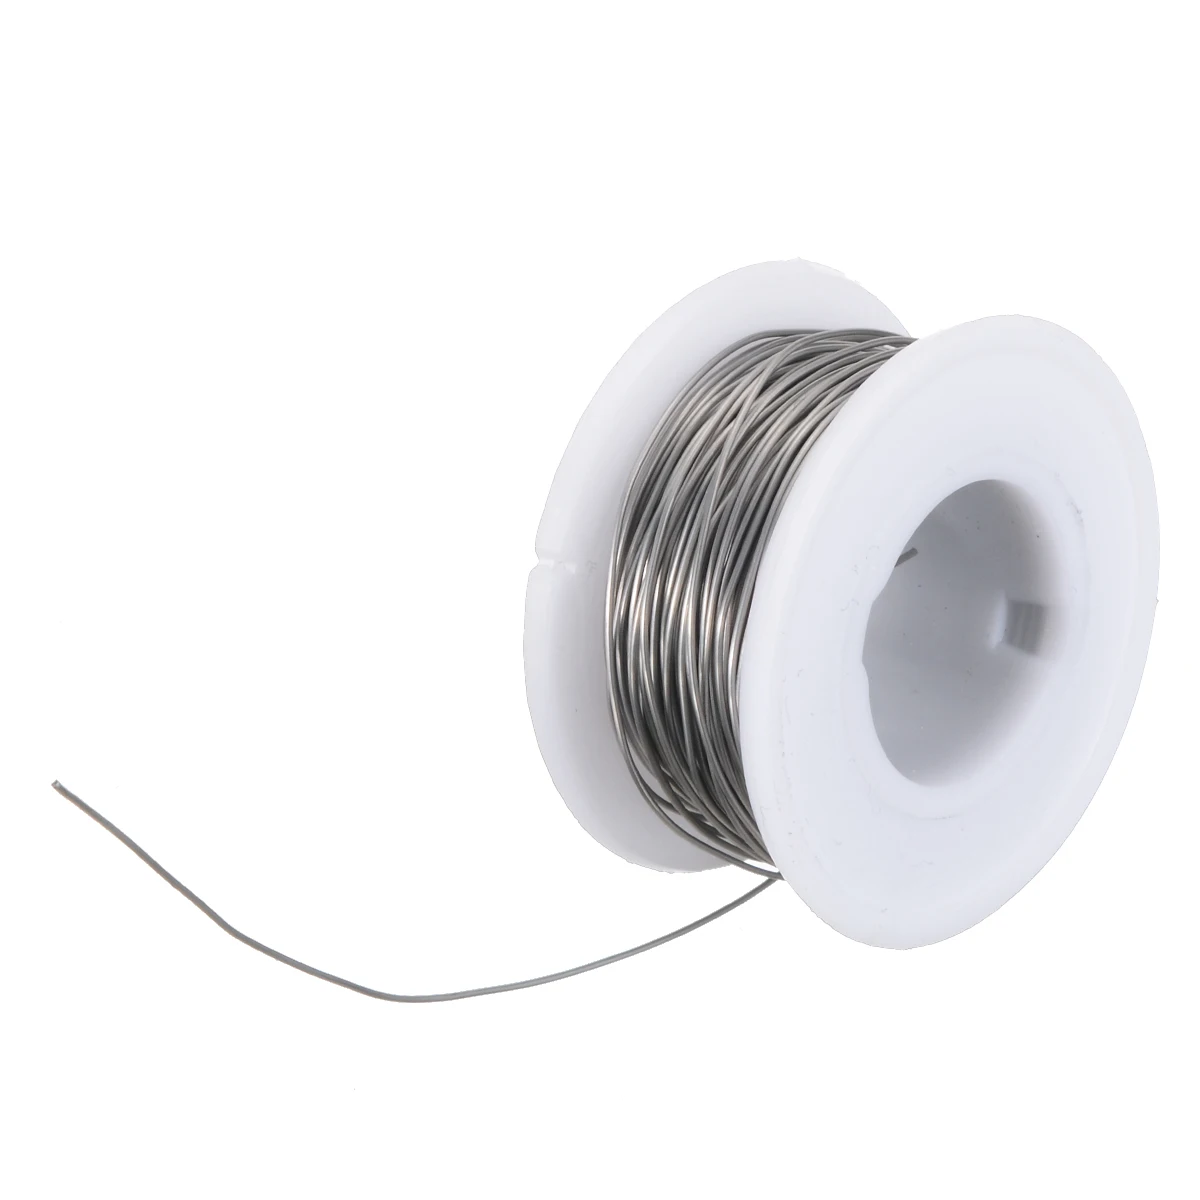 1 Roll 10M Nichrome Wire 0.5mm Diam Cr20Ni80 Heating Wire Resistance Wires Industry Supplies